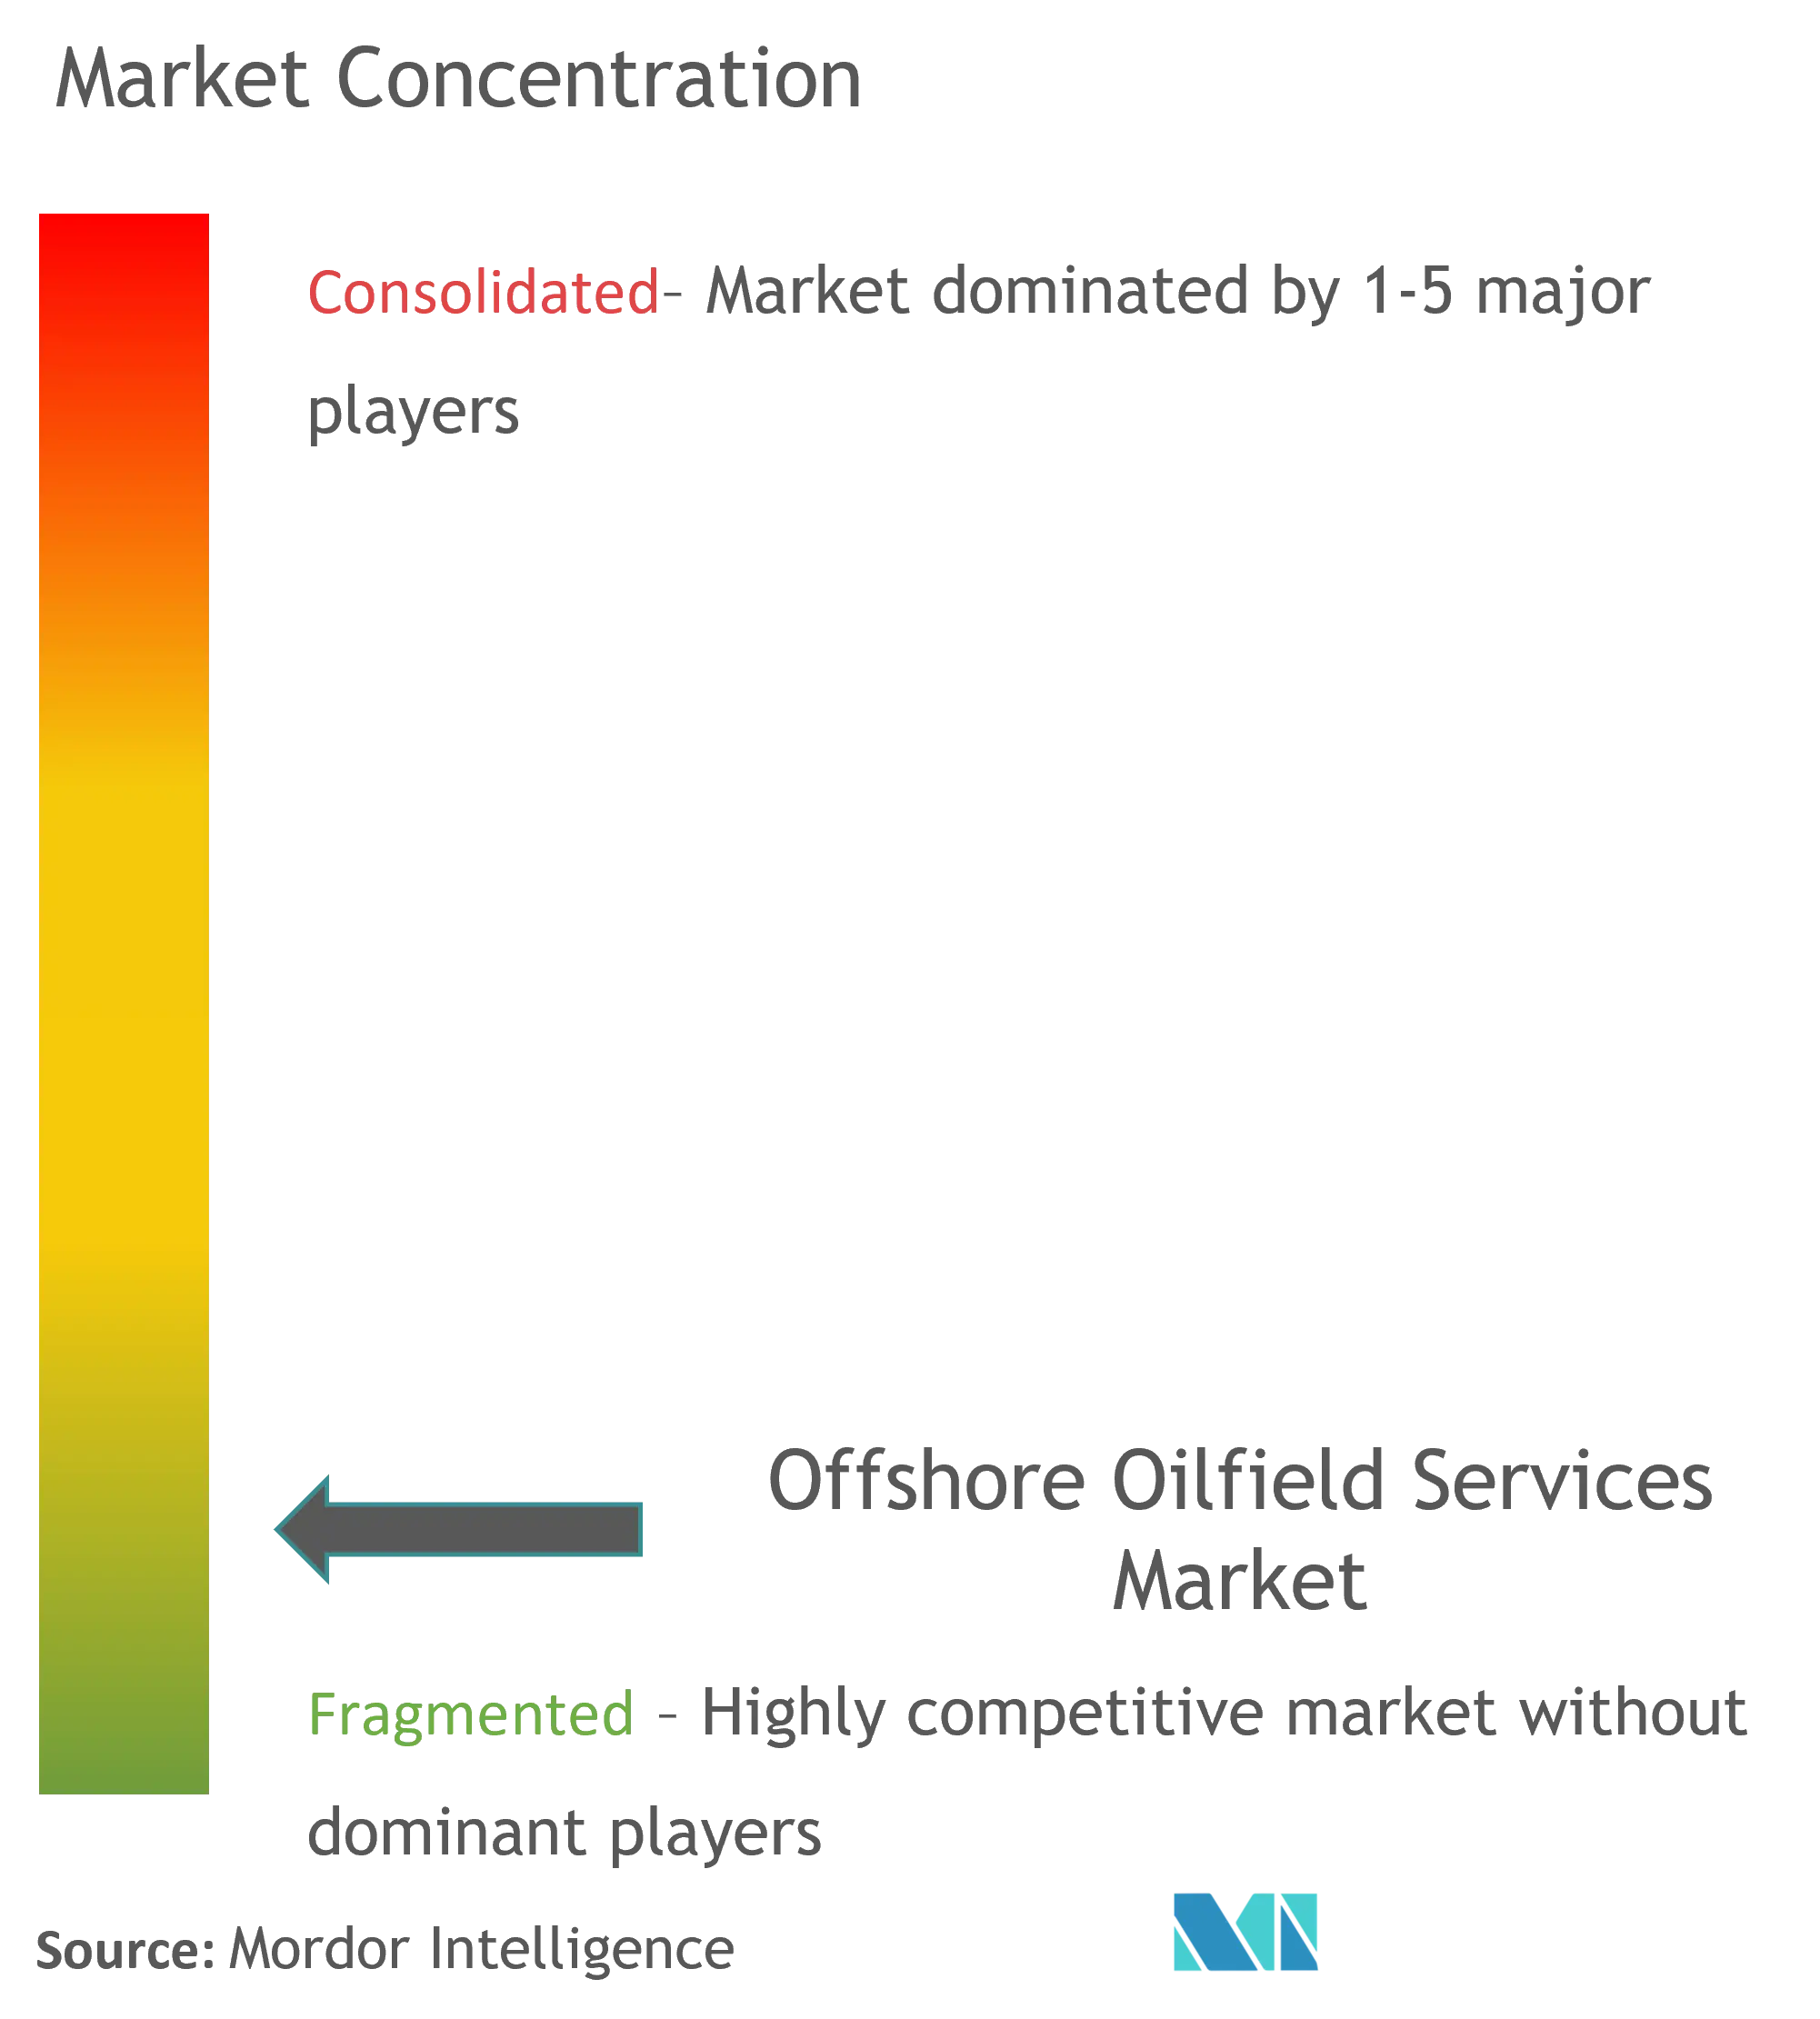 Offshore Oilfield Services Market Concentration